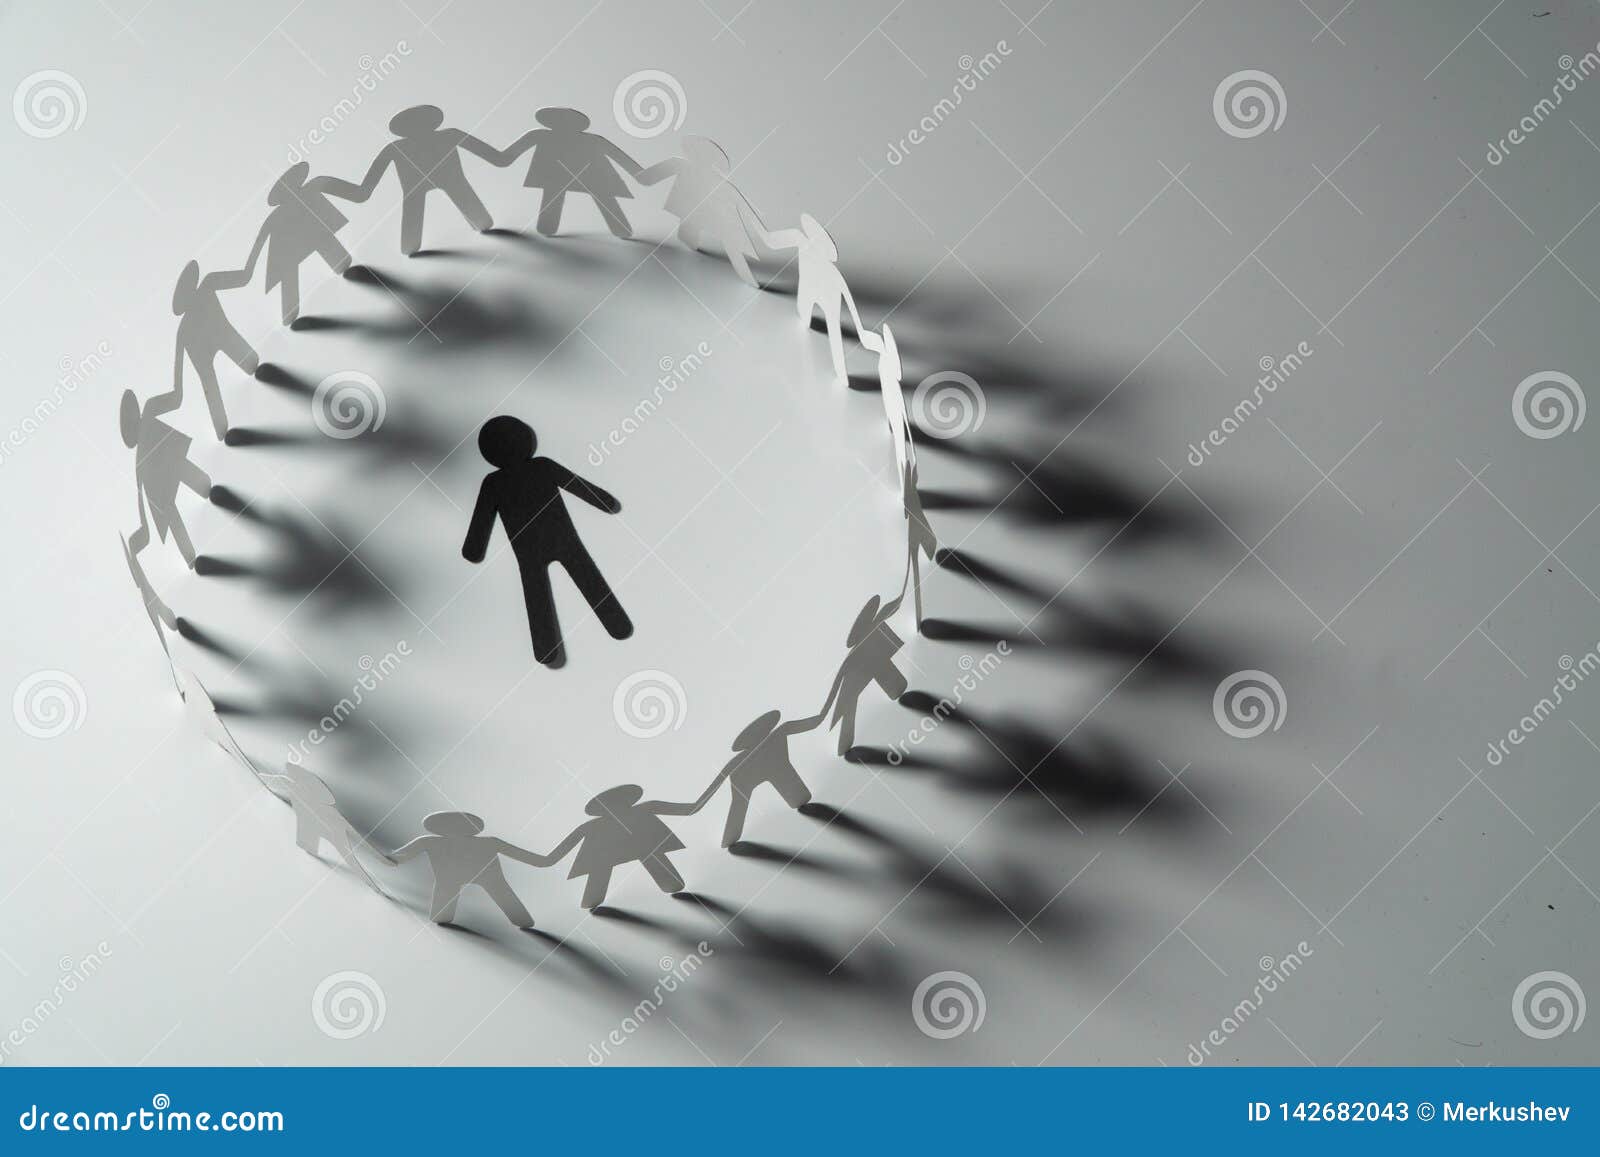 paper human figure surrounded by circle of paper people holding hands on white surface. bulling, segregation, conflict